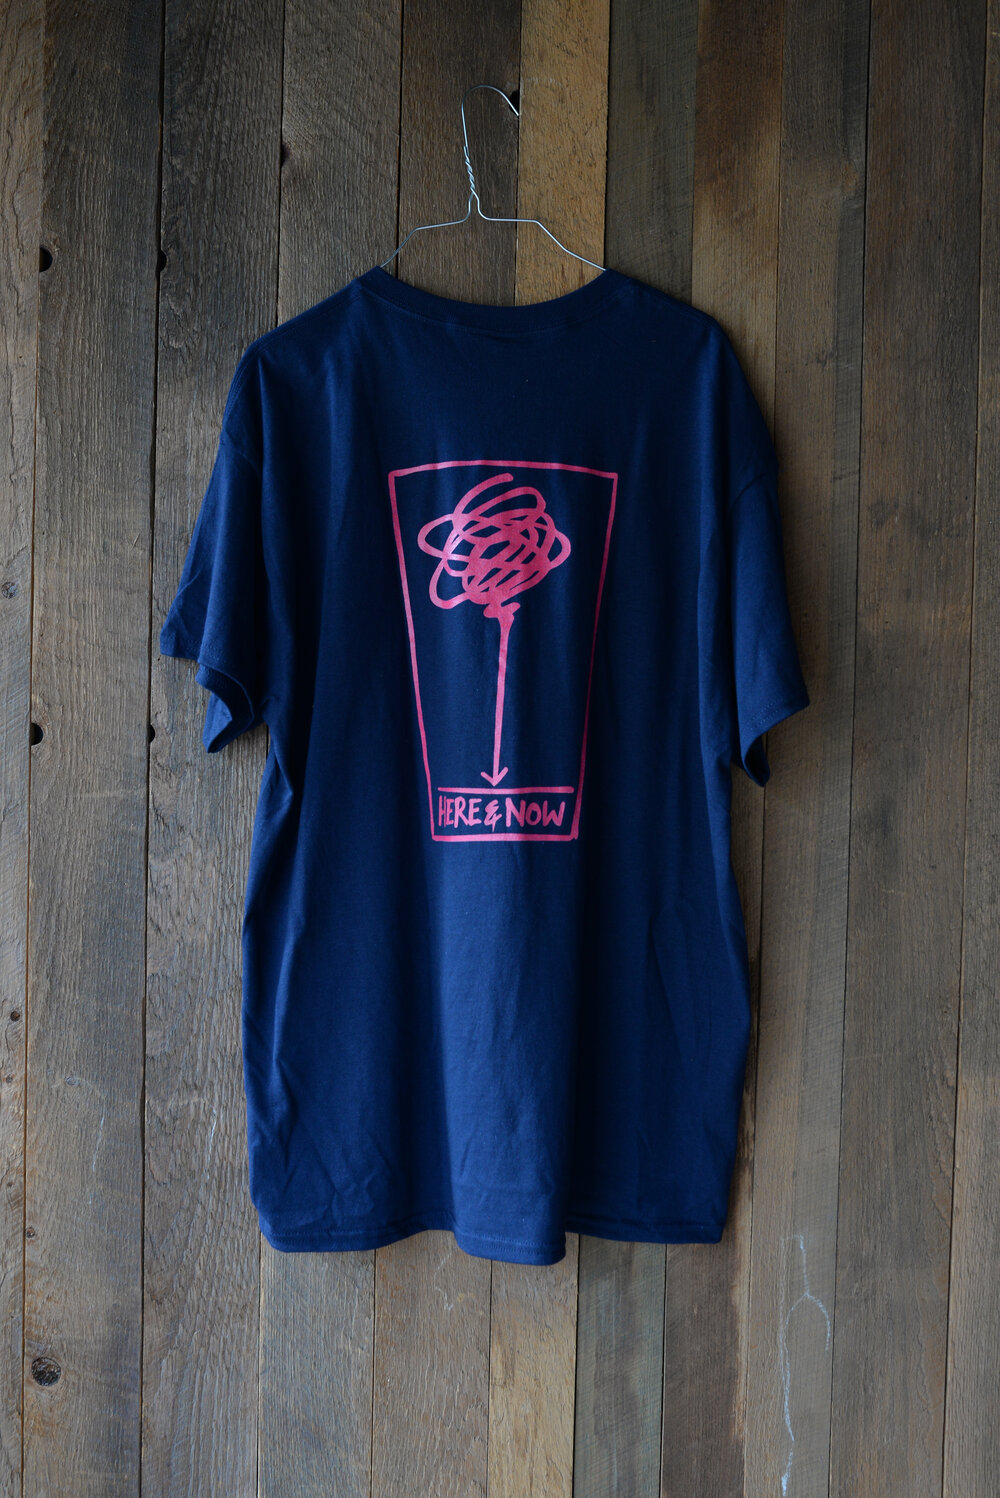 Navy Blue w/ Hot Pink Logo Shirt — Here & Now Brewing Company